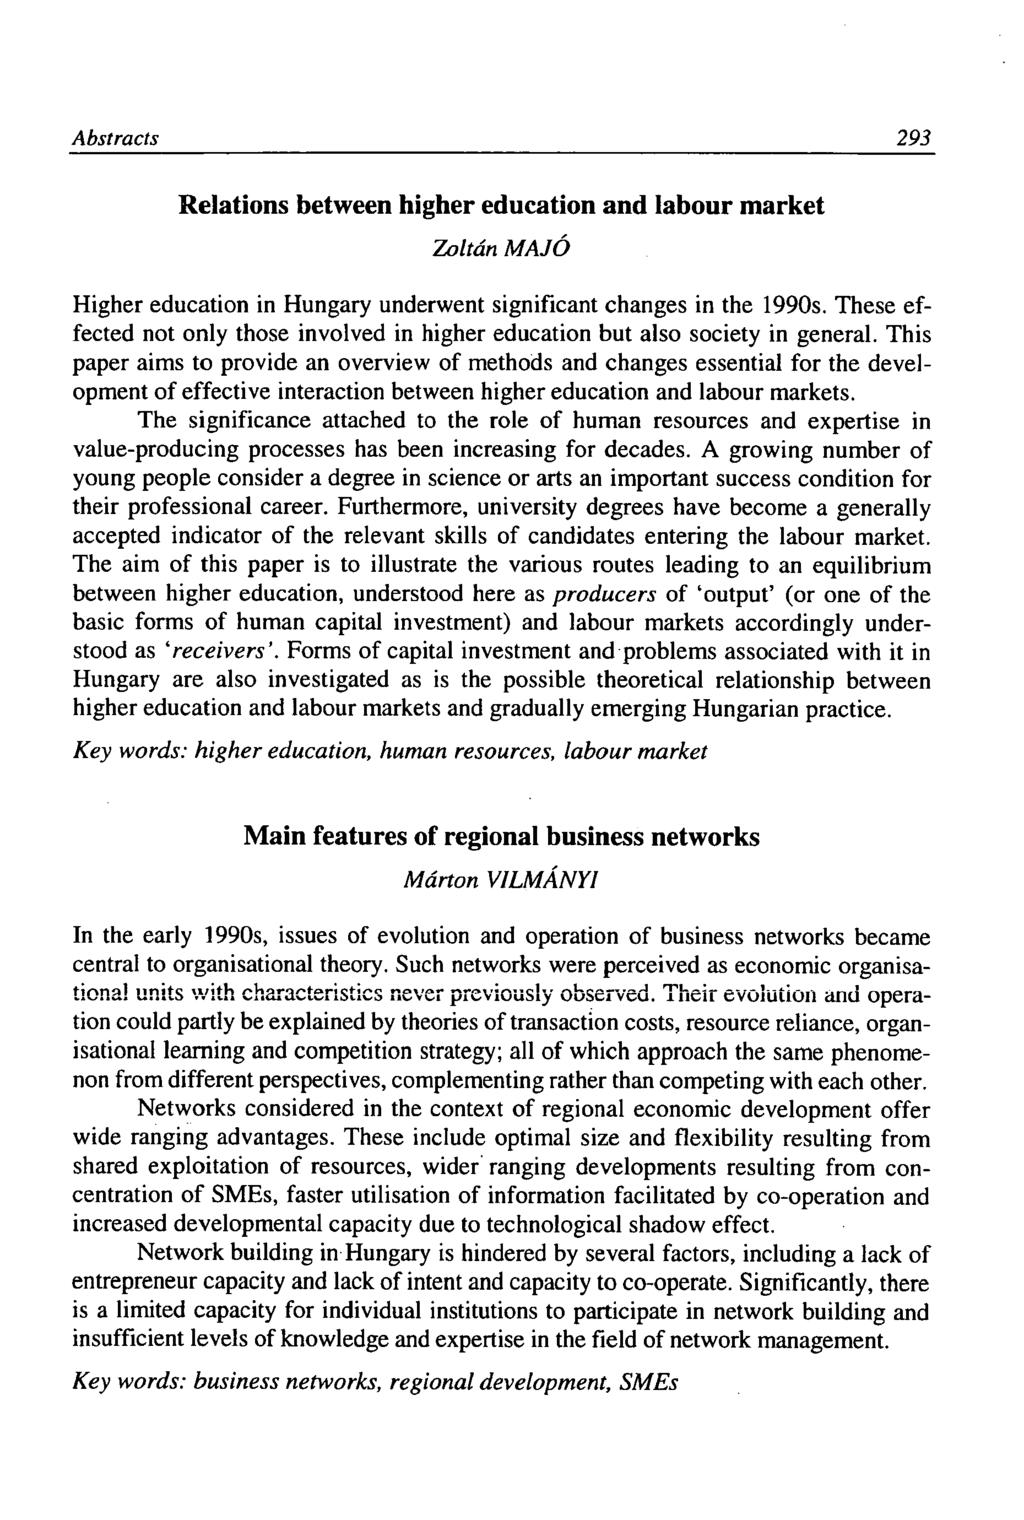 Abstracts 293 Relations between higher education and labour market Zoltán MAJÓ Higher education in Hungary underwent significant changes in the 1990s.